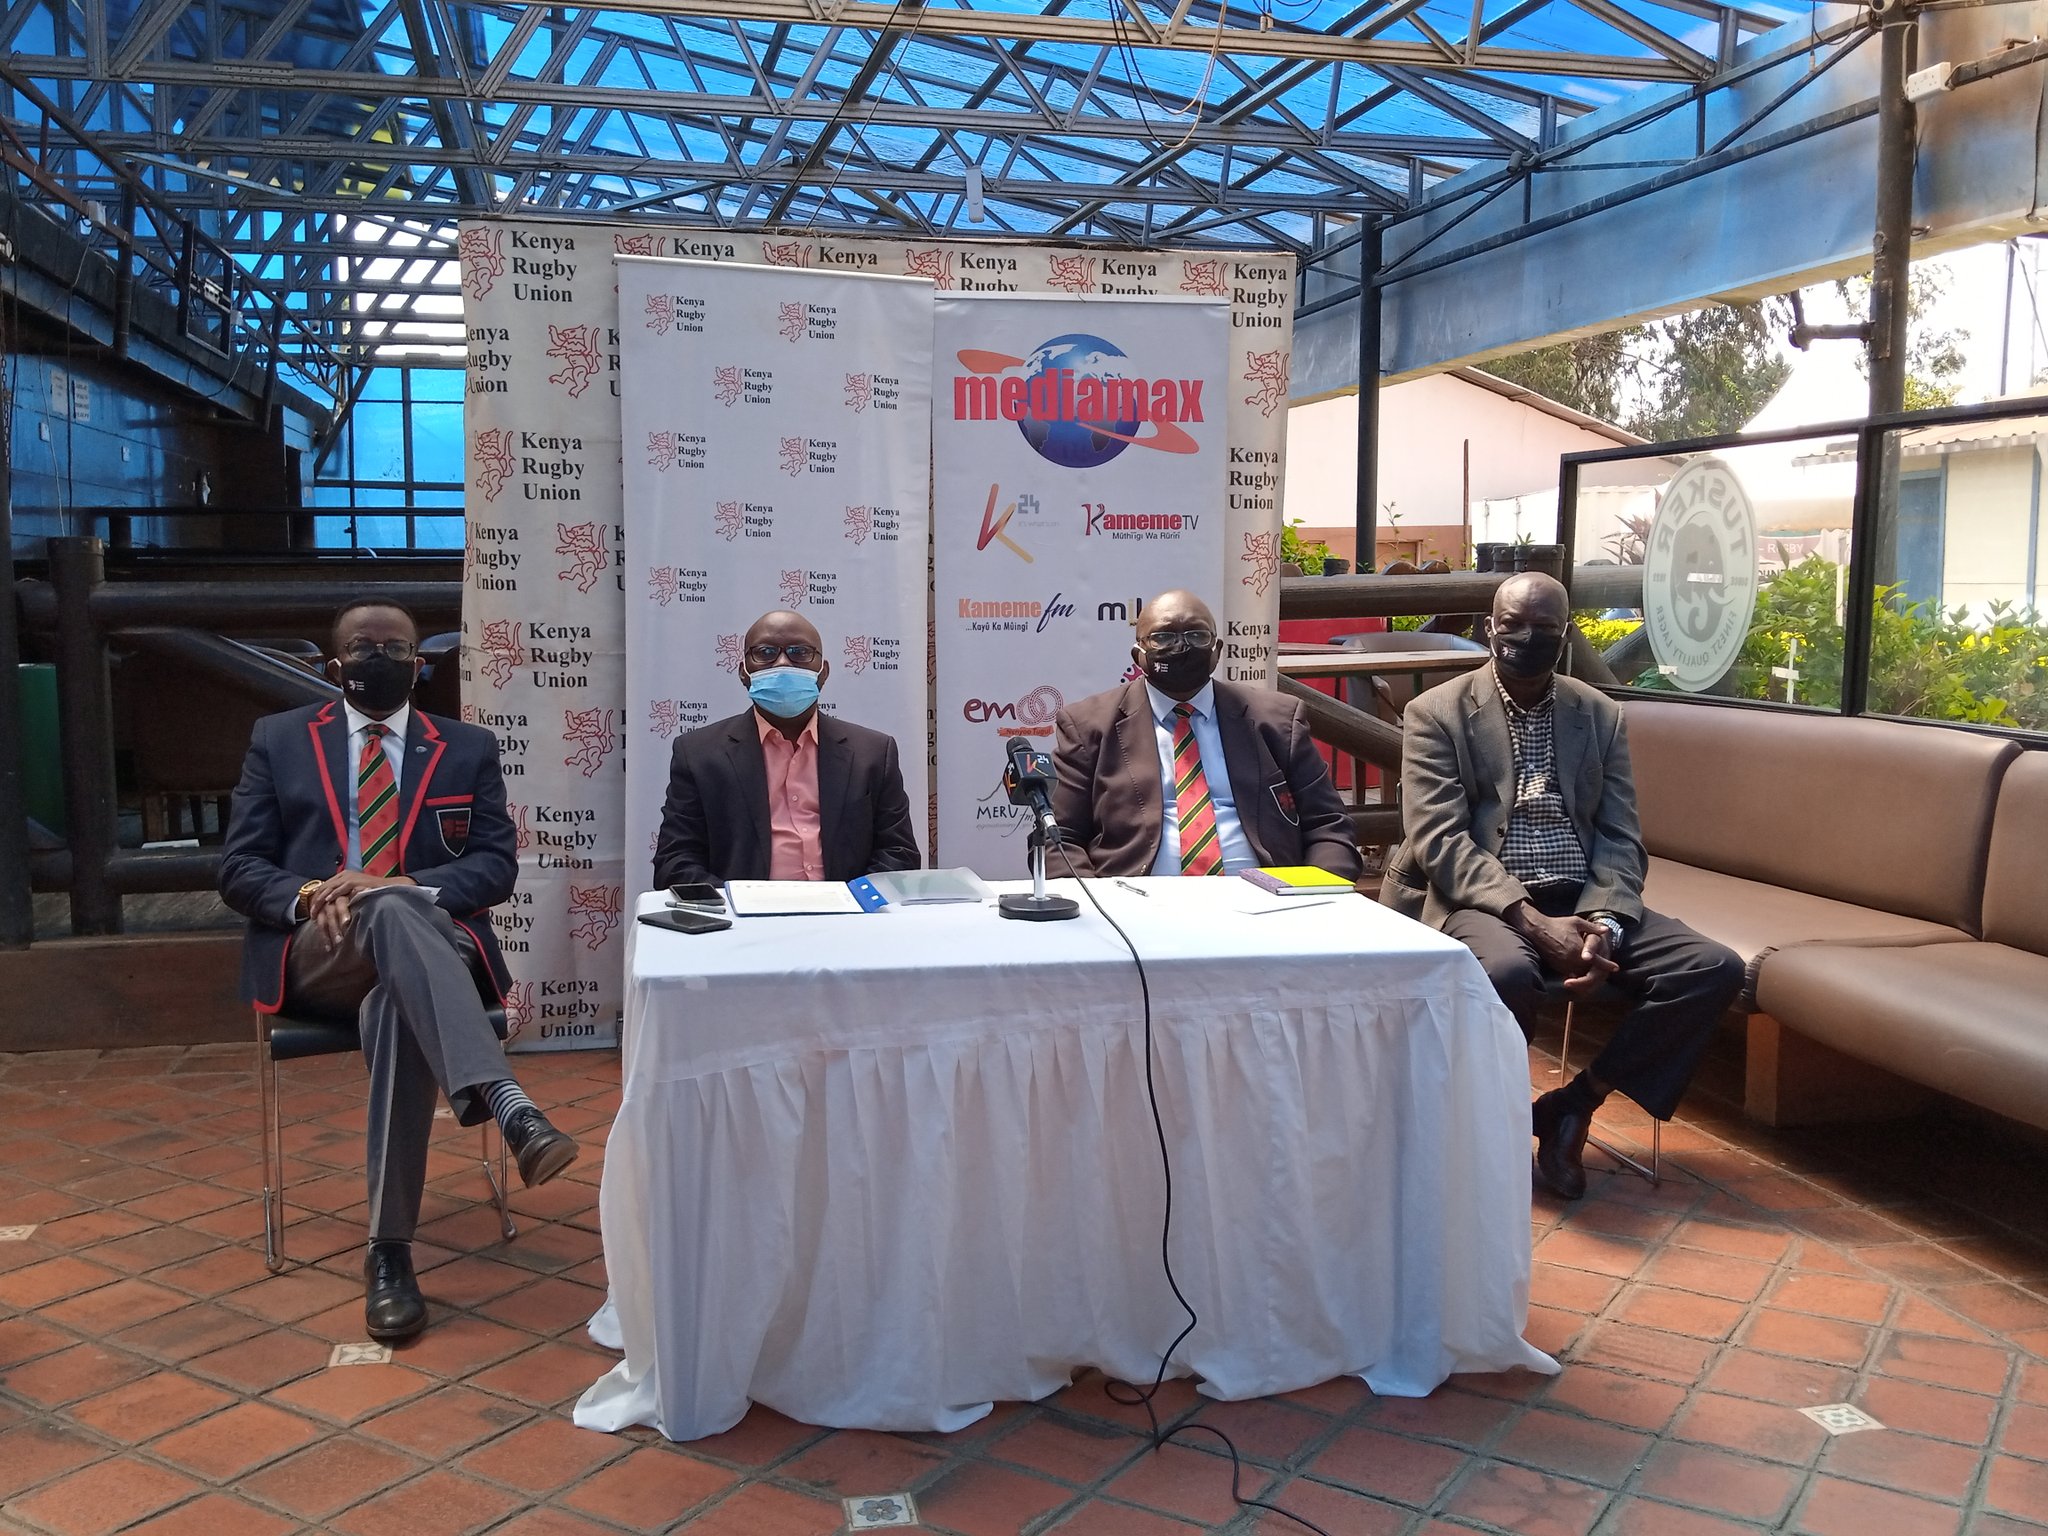 Kenya Rugby Union (KRU) and Mediamax officials at a press briefing on November 26, 2020